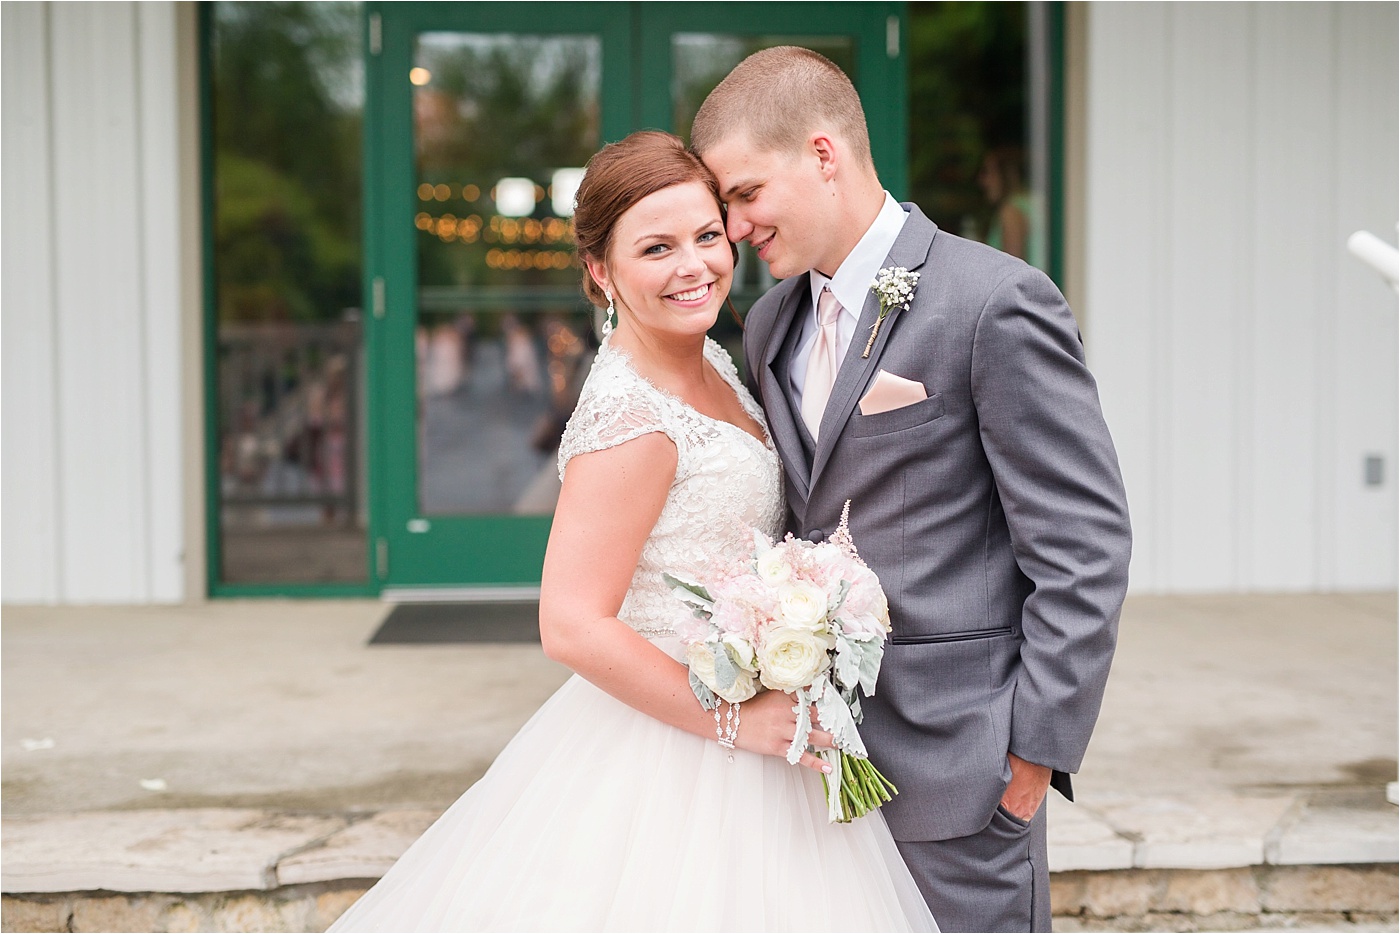 A Blush Outdoor wedding at Irongate Equestrian | KariMe Photography_0102